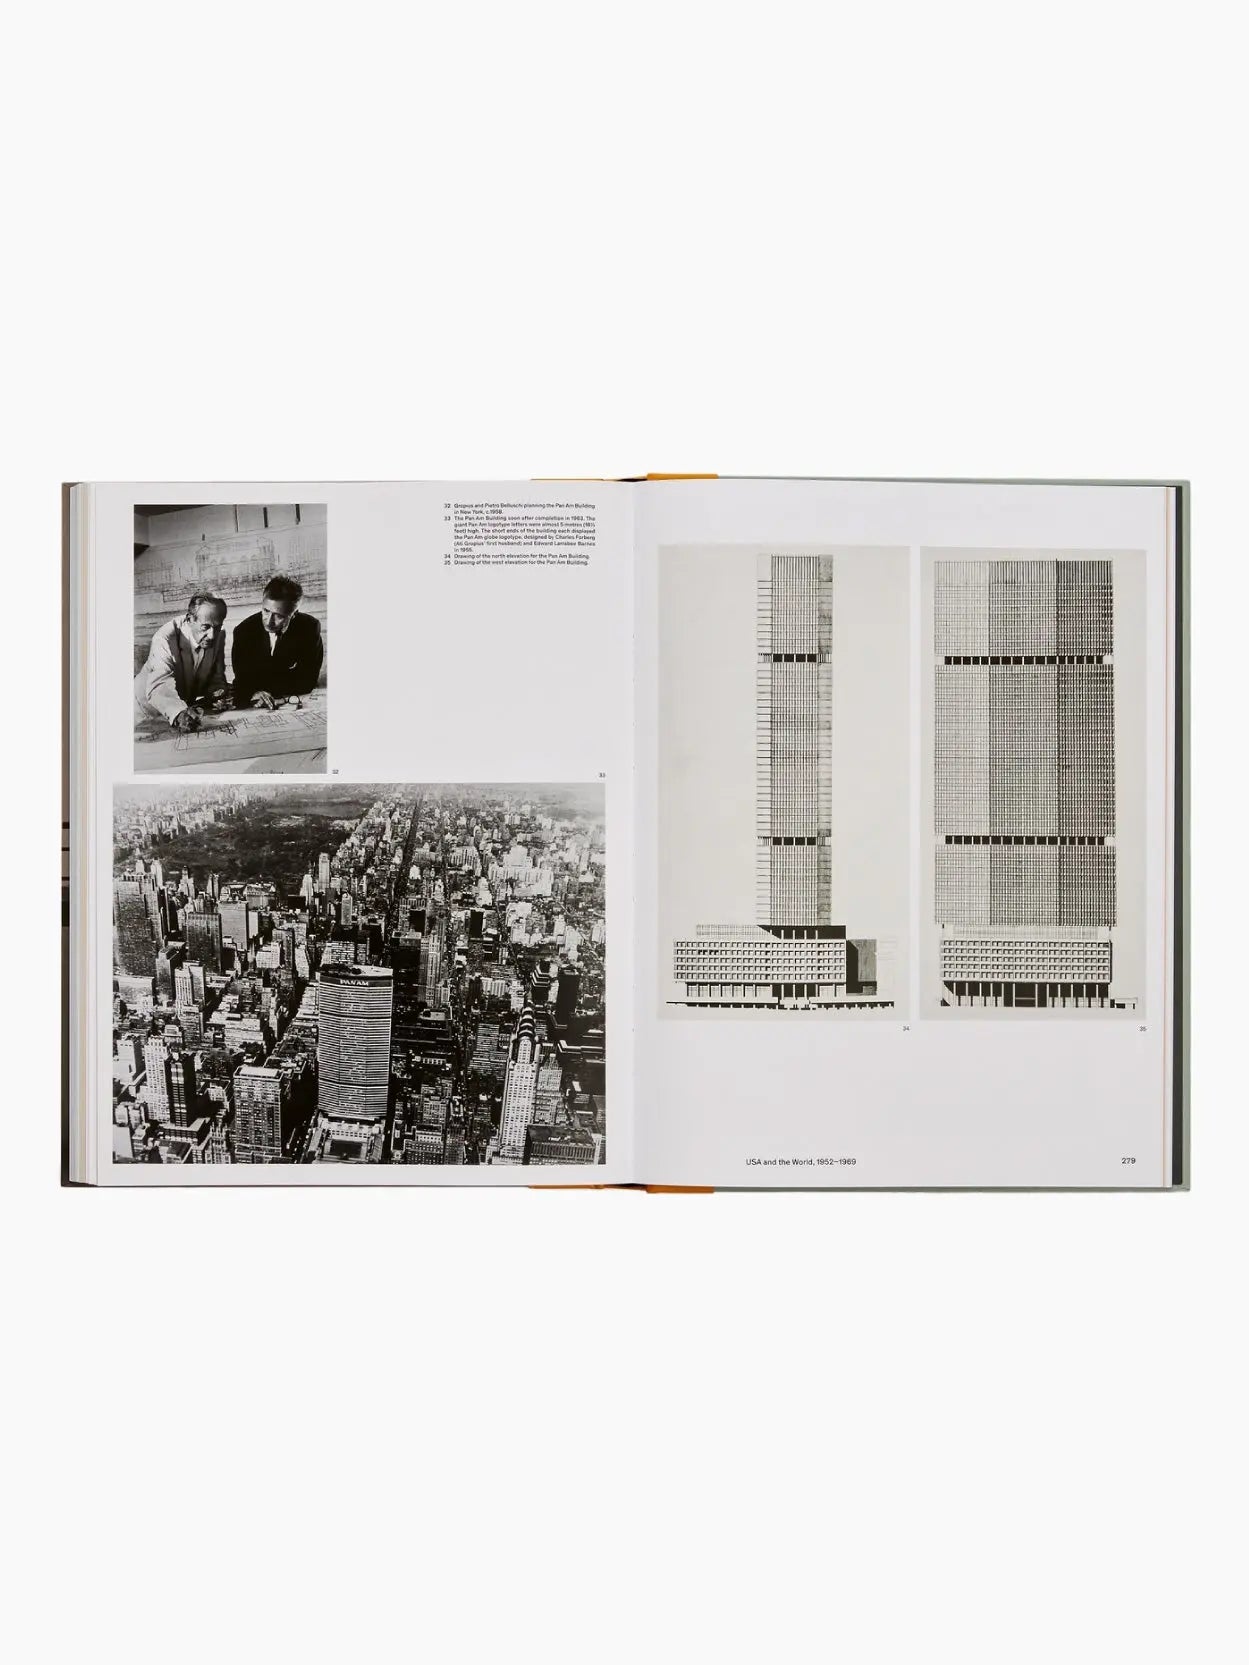 The image shows a book titled "Walter Gropius: An Illustrated Biography" with a hard cover, available at BassalStore. The spine is yellow with the title and the name "Phaidon" printed on it. The cover features a grayscale photograph of industrial-style furniture and the title in white bold letters, reminiscent of Barcelona's design ethos.